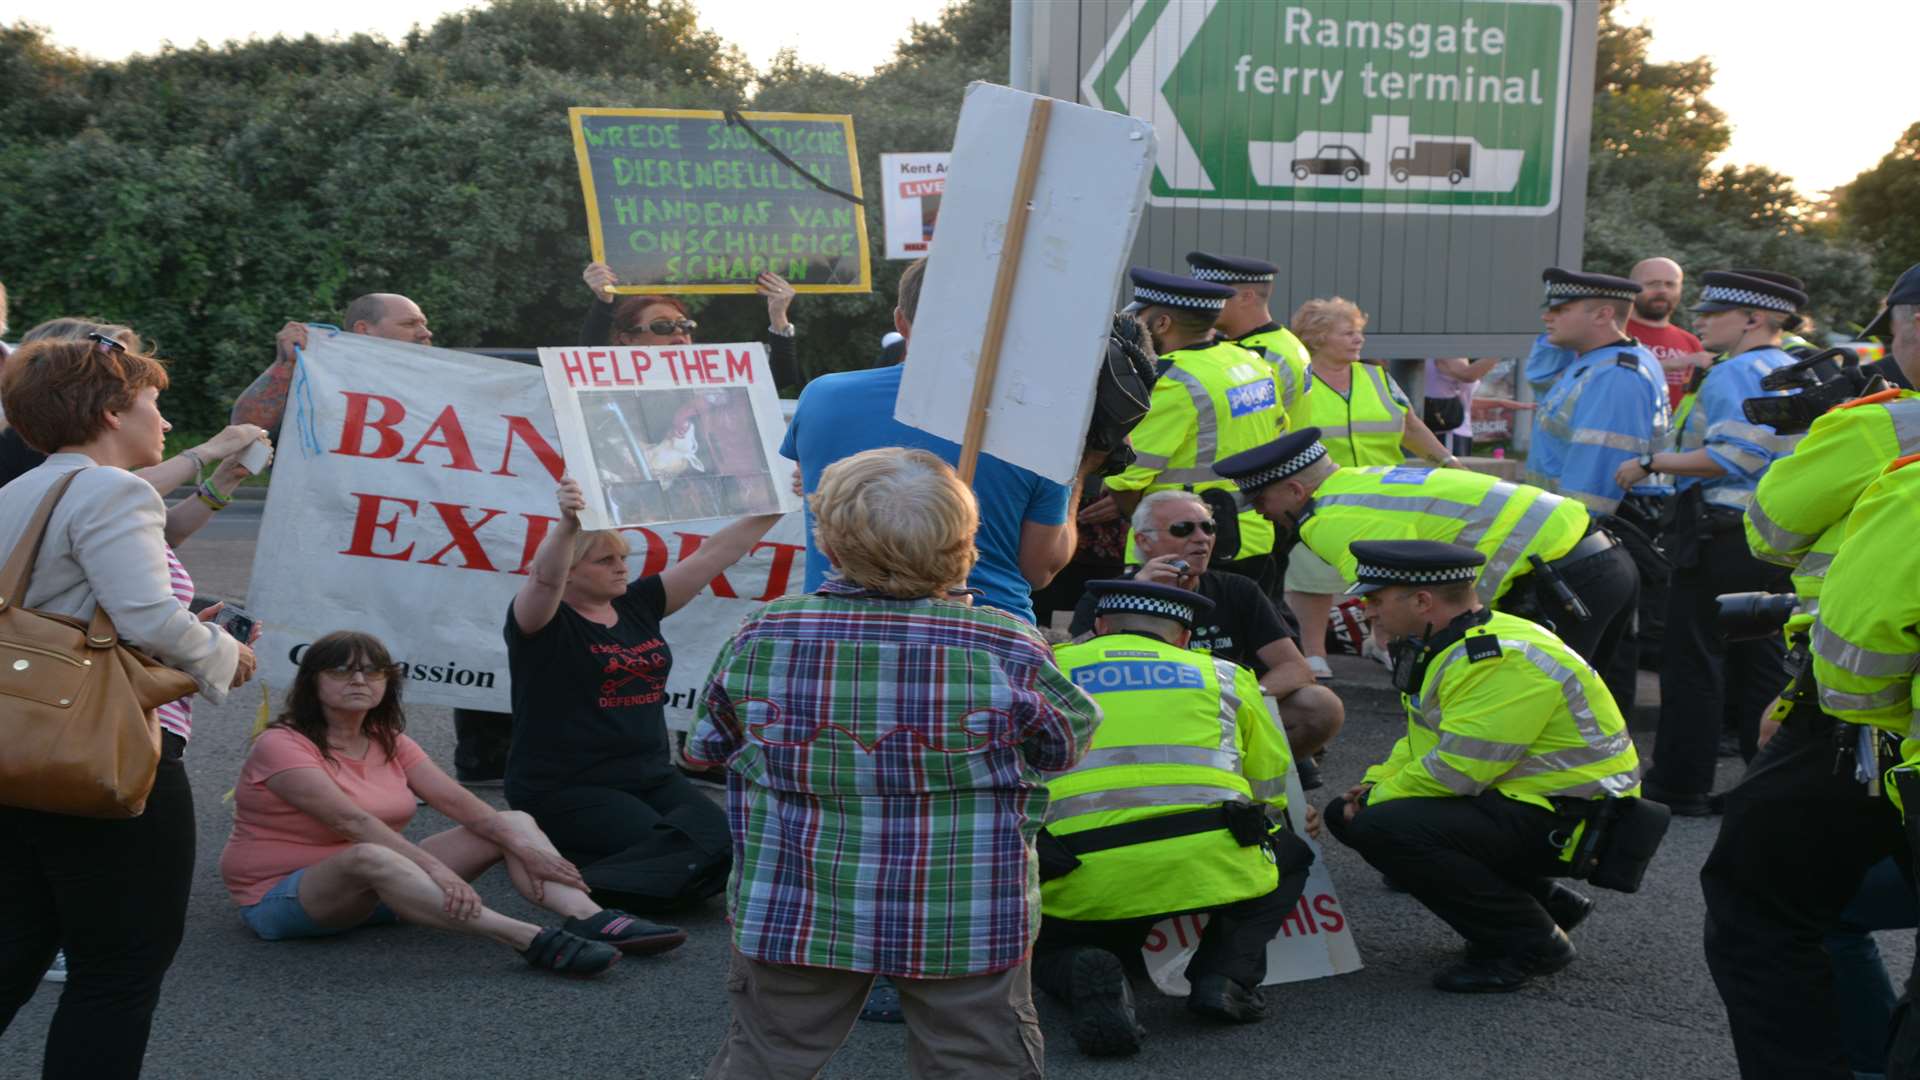 Protesters campaign against live animal exports at Ramsgate Port